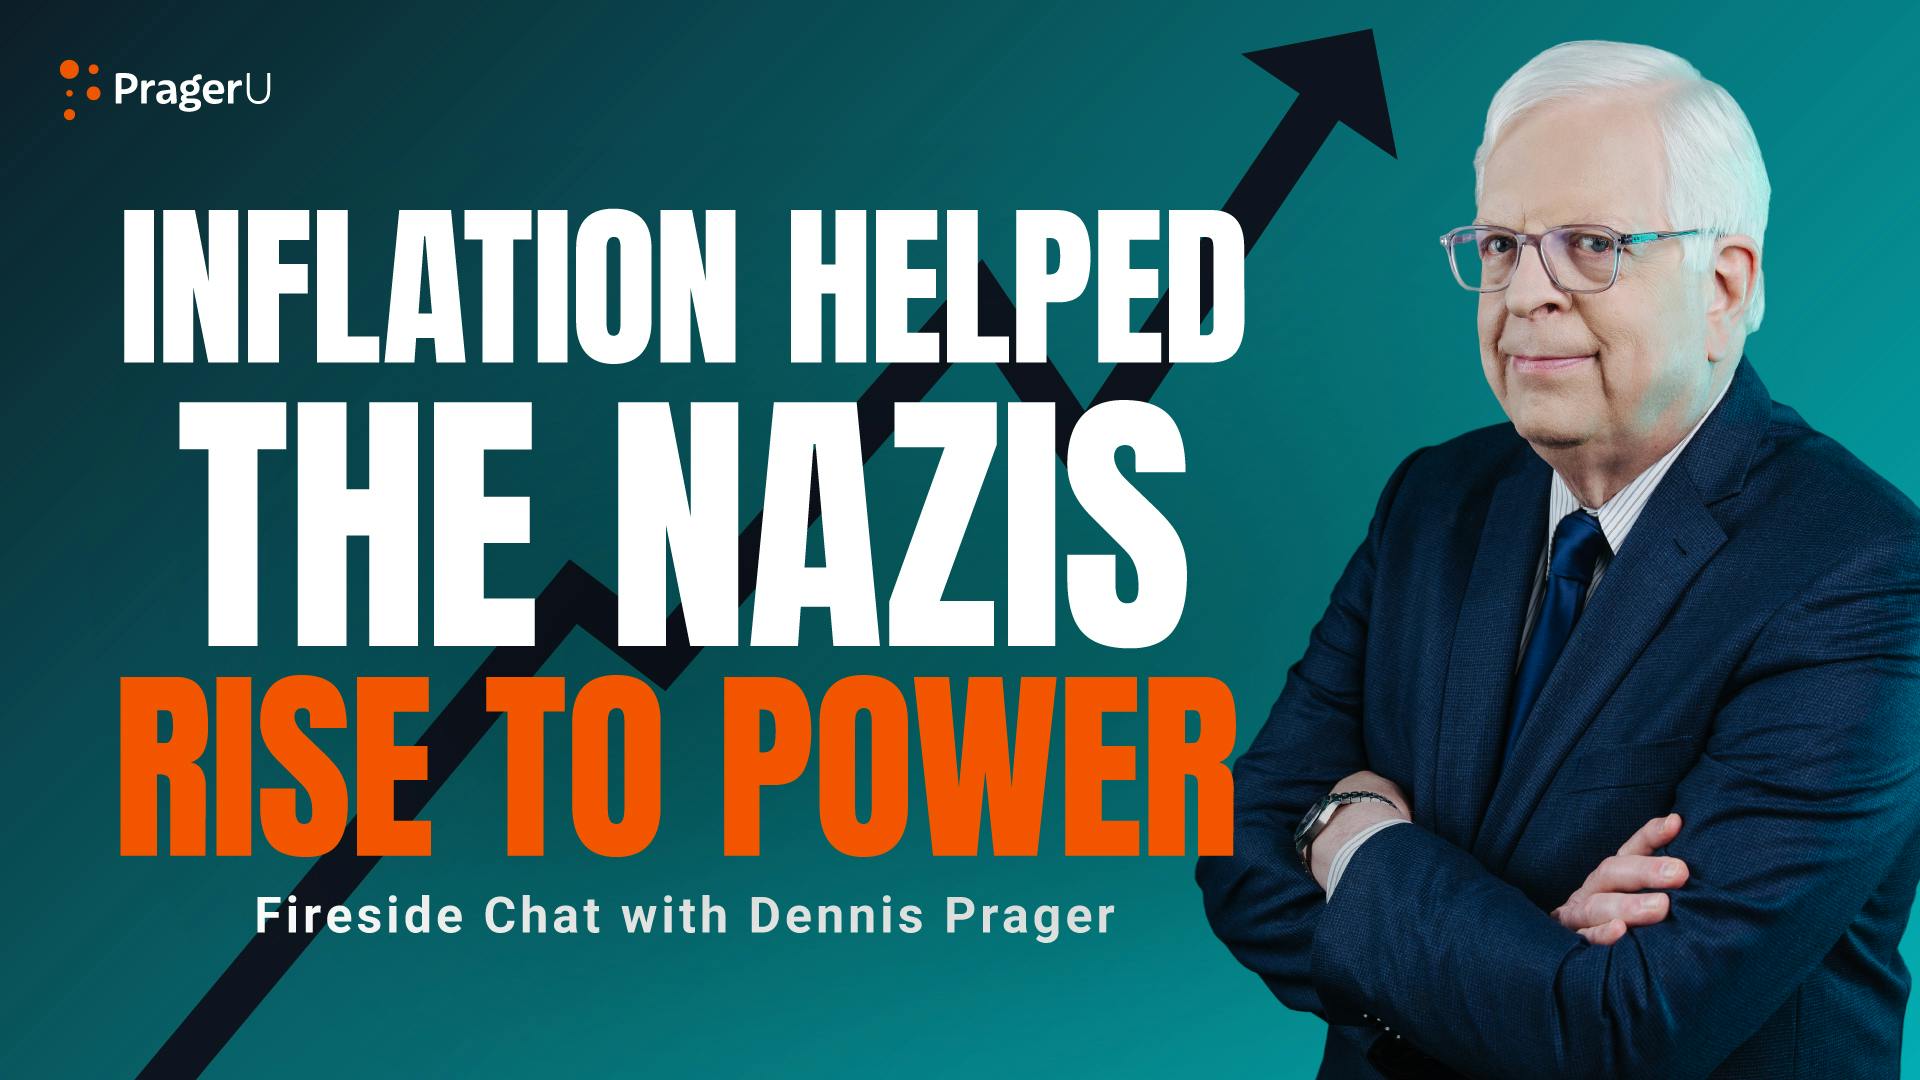 Inflation Helped the Nazis Rise to Power